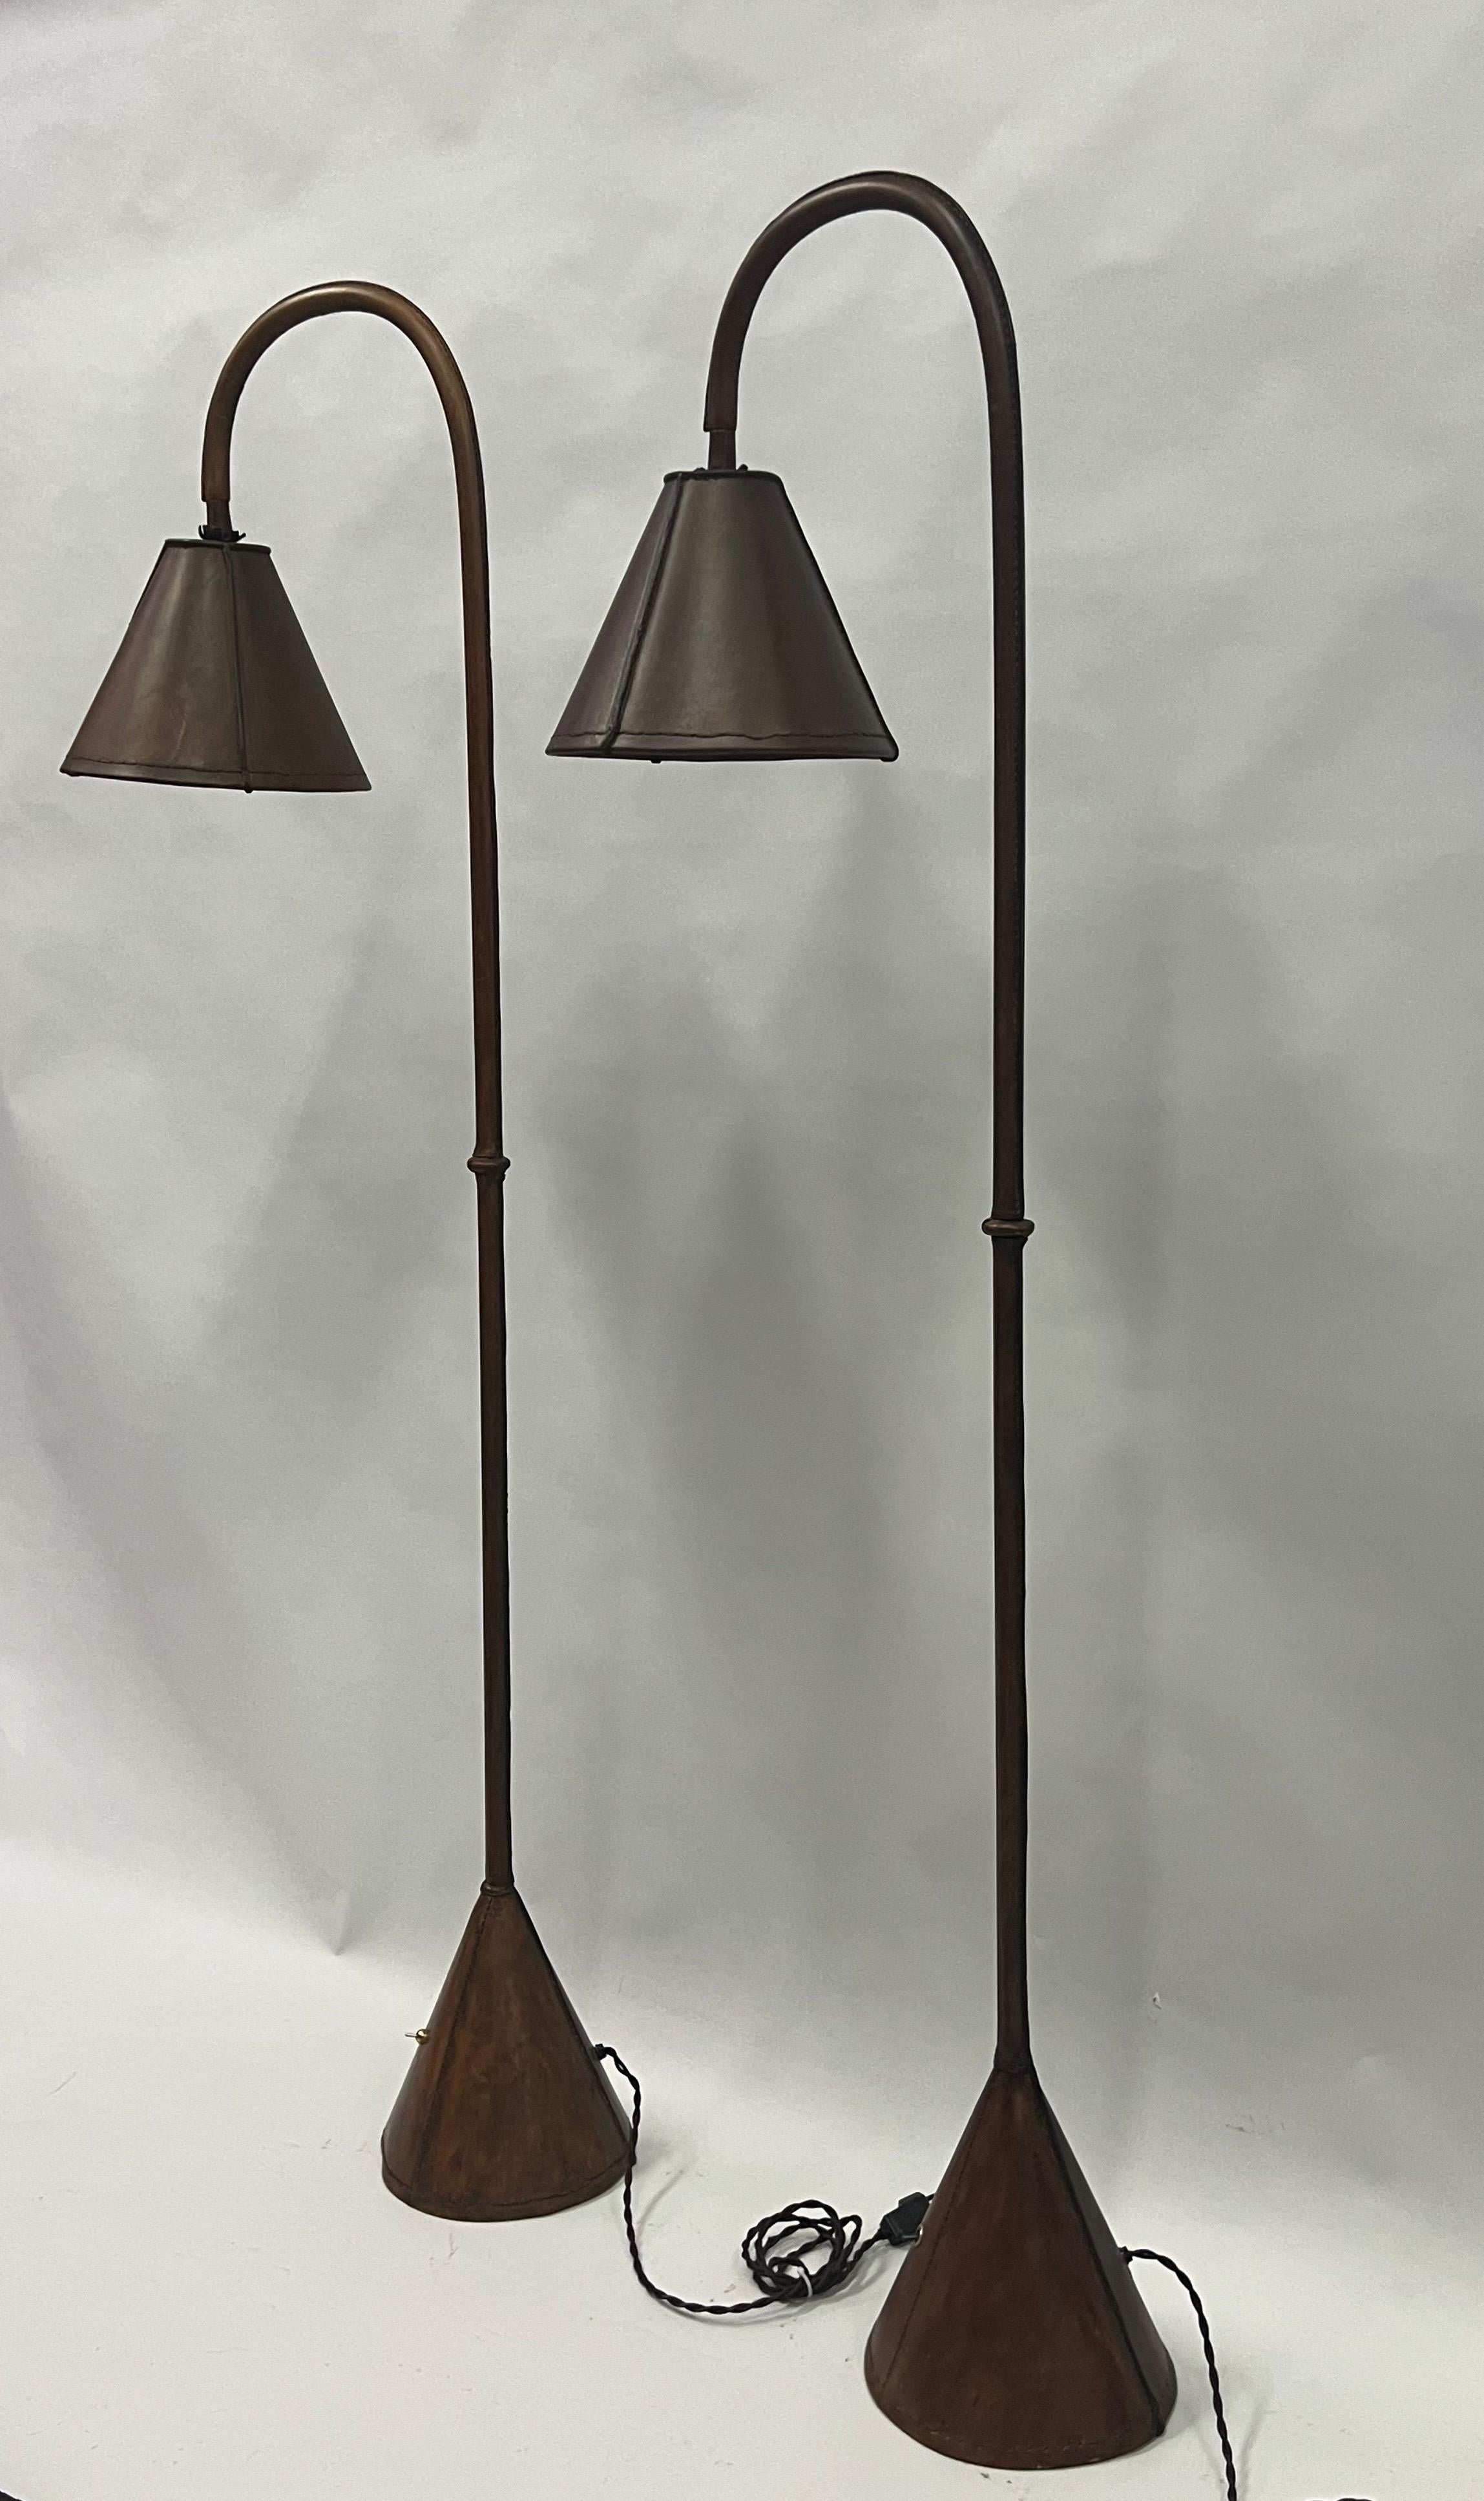 Pair of French Mid-Century Hand-Stitched Leather Floor Lamps by Jacques Adnet In Good Condition For Sale In New York, NY